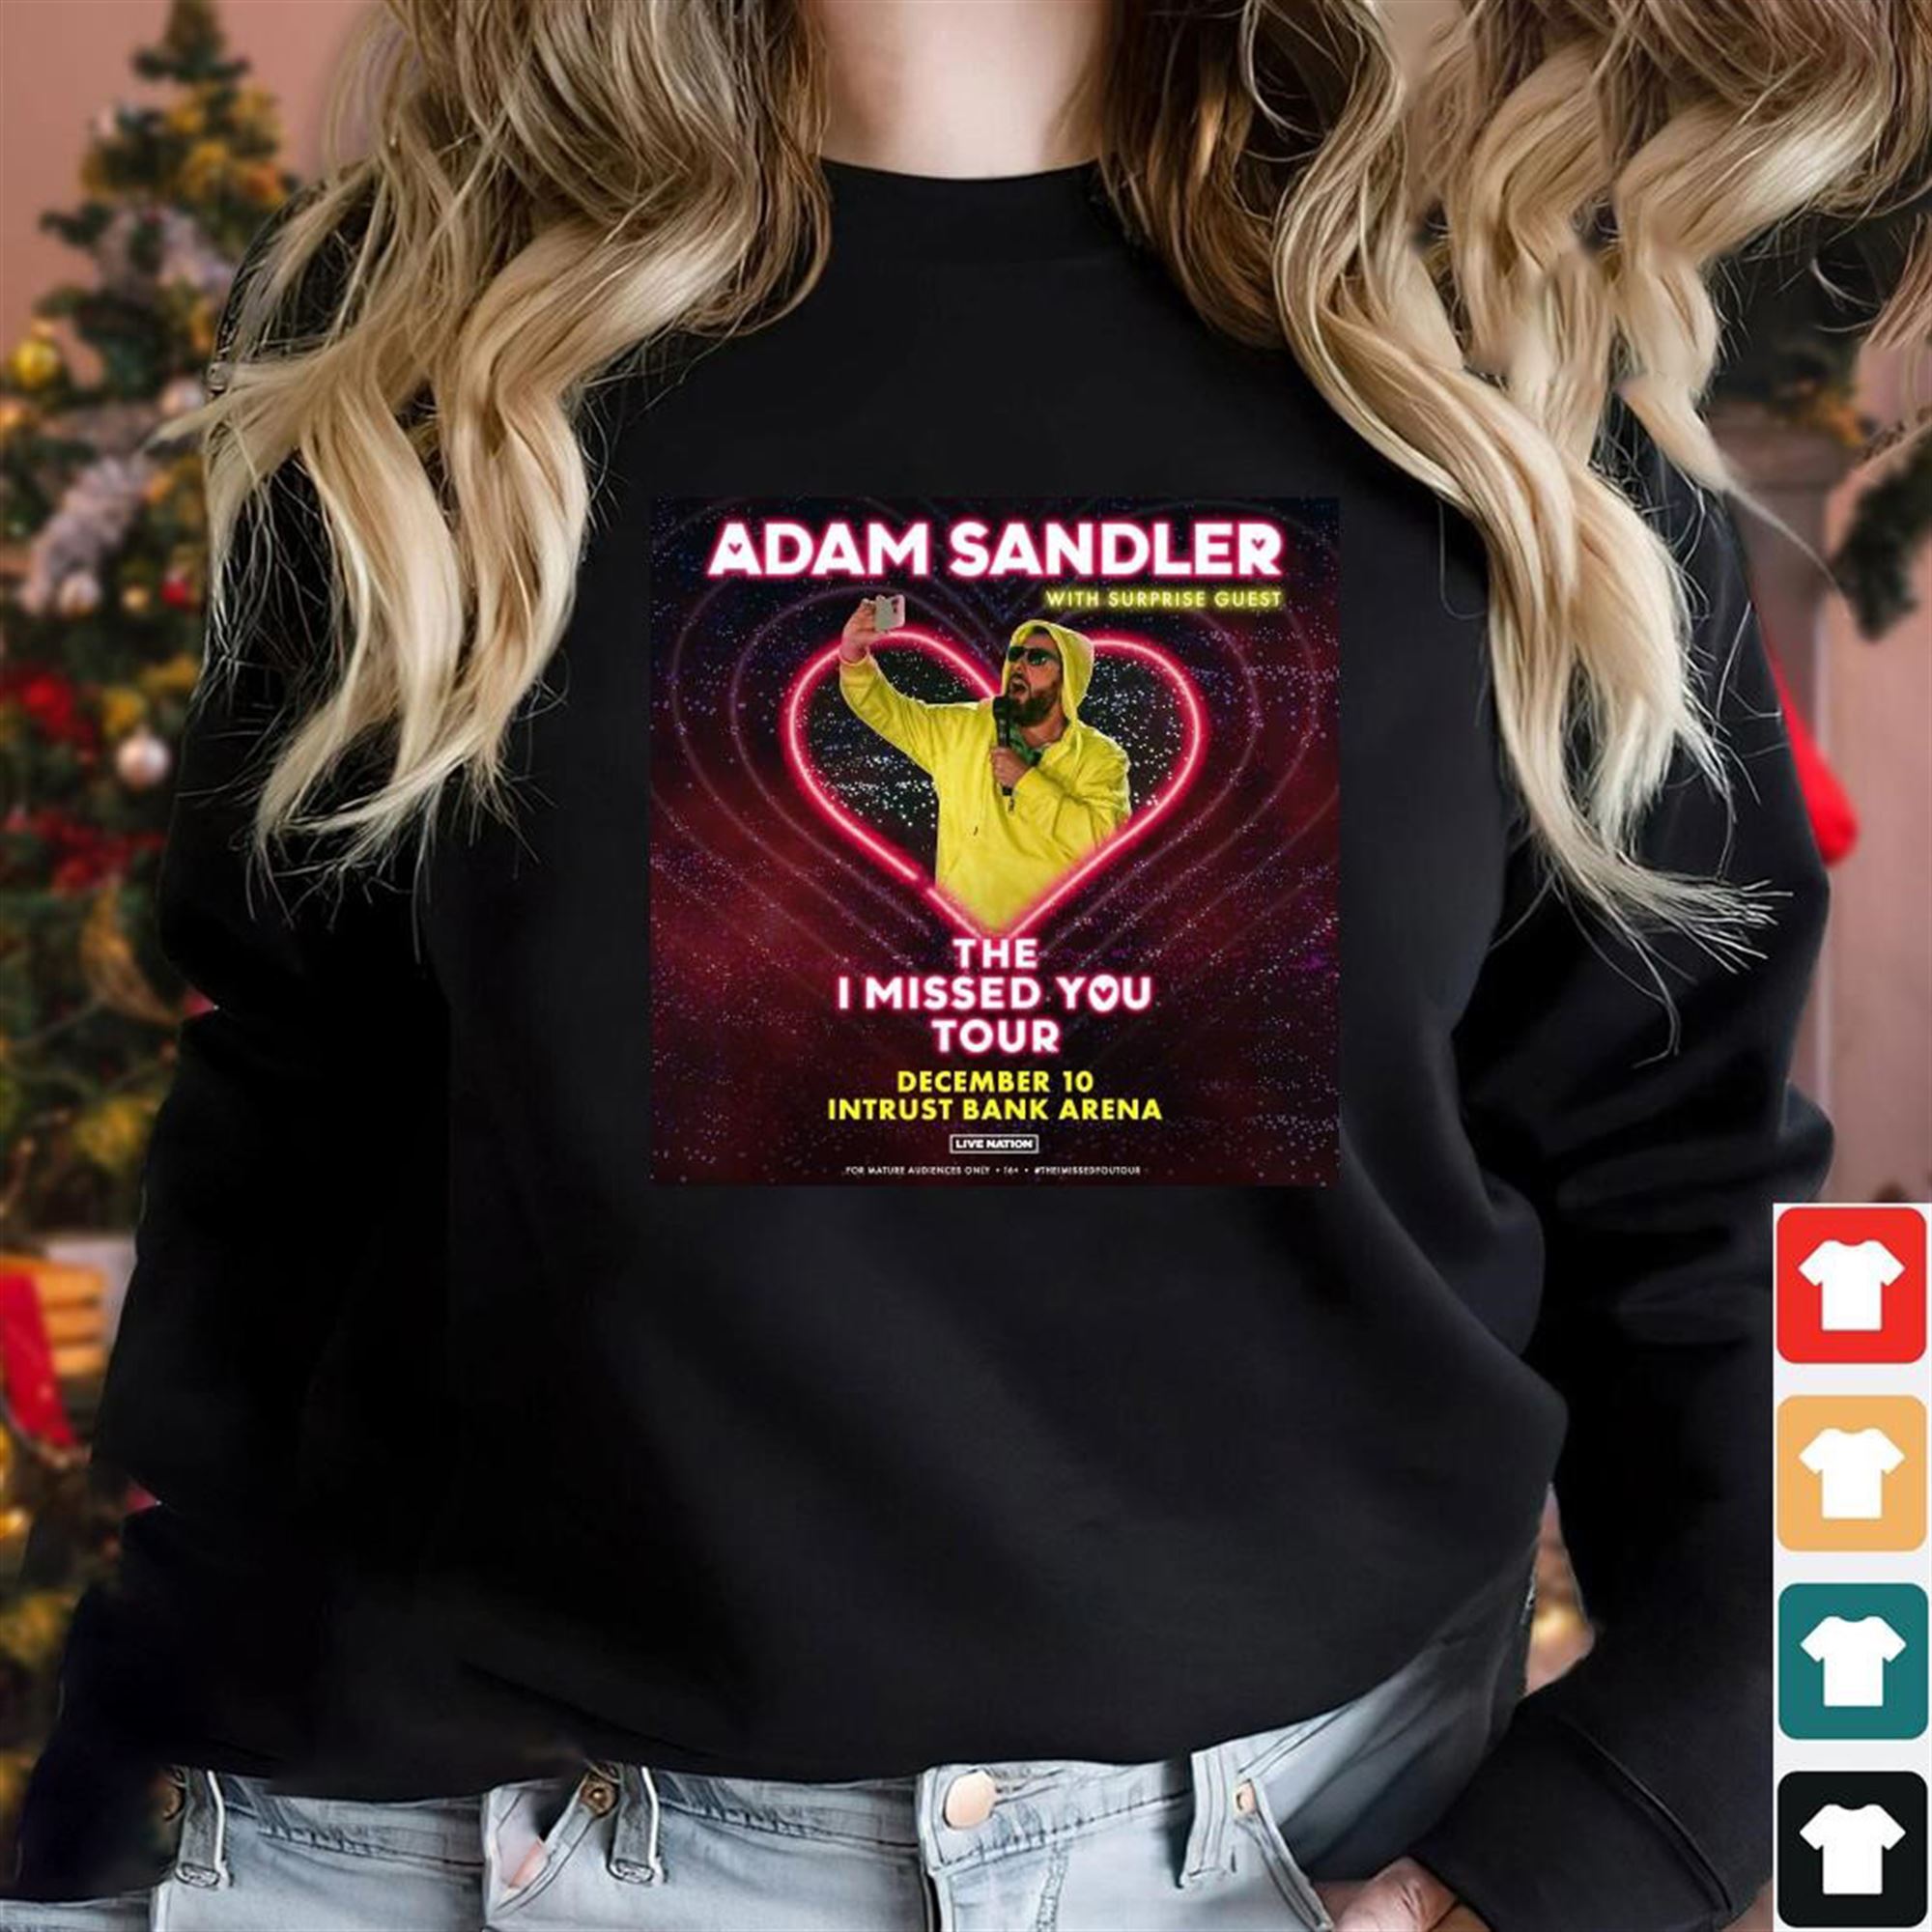 Adam Sandler With Surprise Guest The I Missed You Tour Shirt Plus Size Up To 5xl